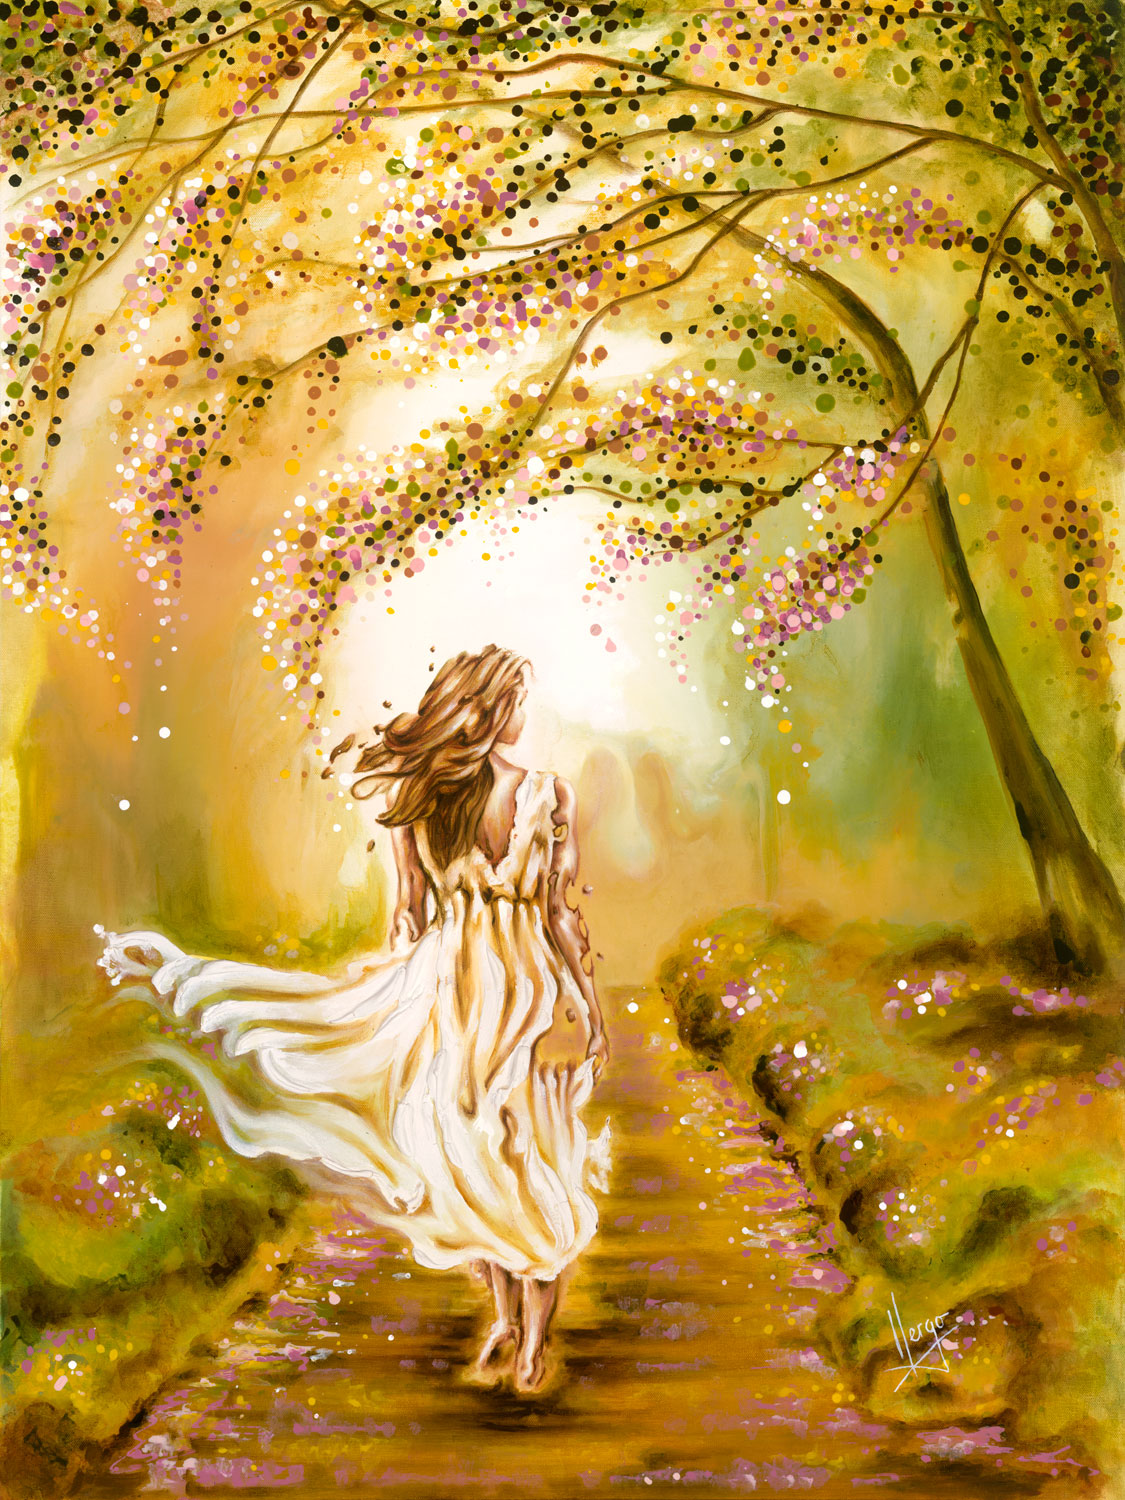 "A Walk in the Park" figure painting of a woman walking in a park in the spring with white dress